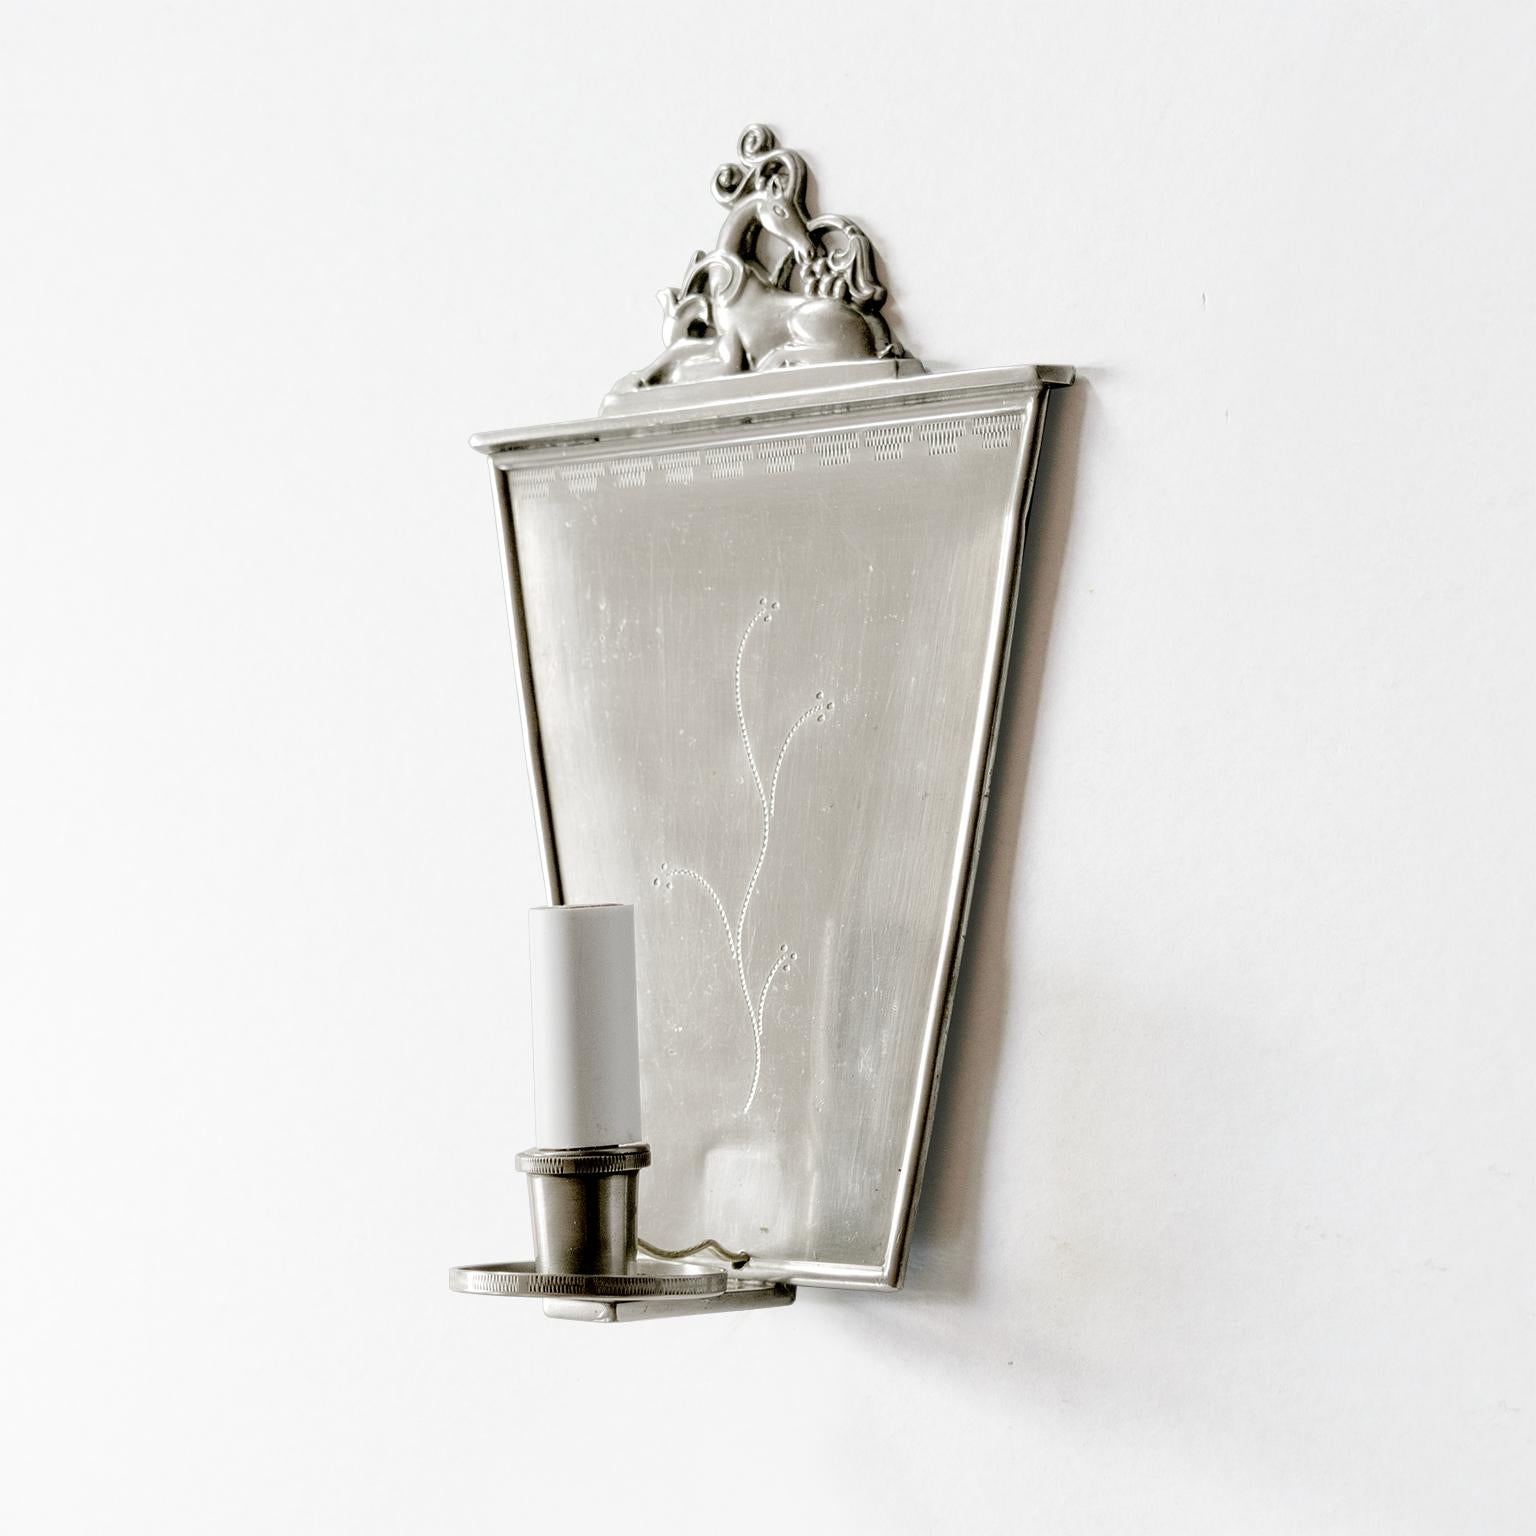 Pair of Swedish Grace polished Pewter Sconces by, C.G. Hallberg, Stockholm In Good Condition For Sale In New York, NY